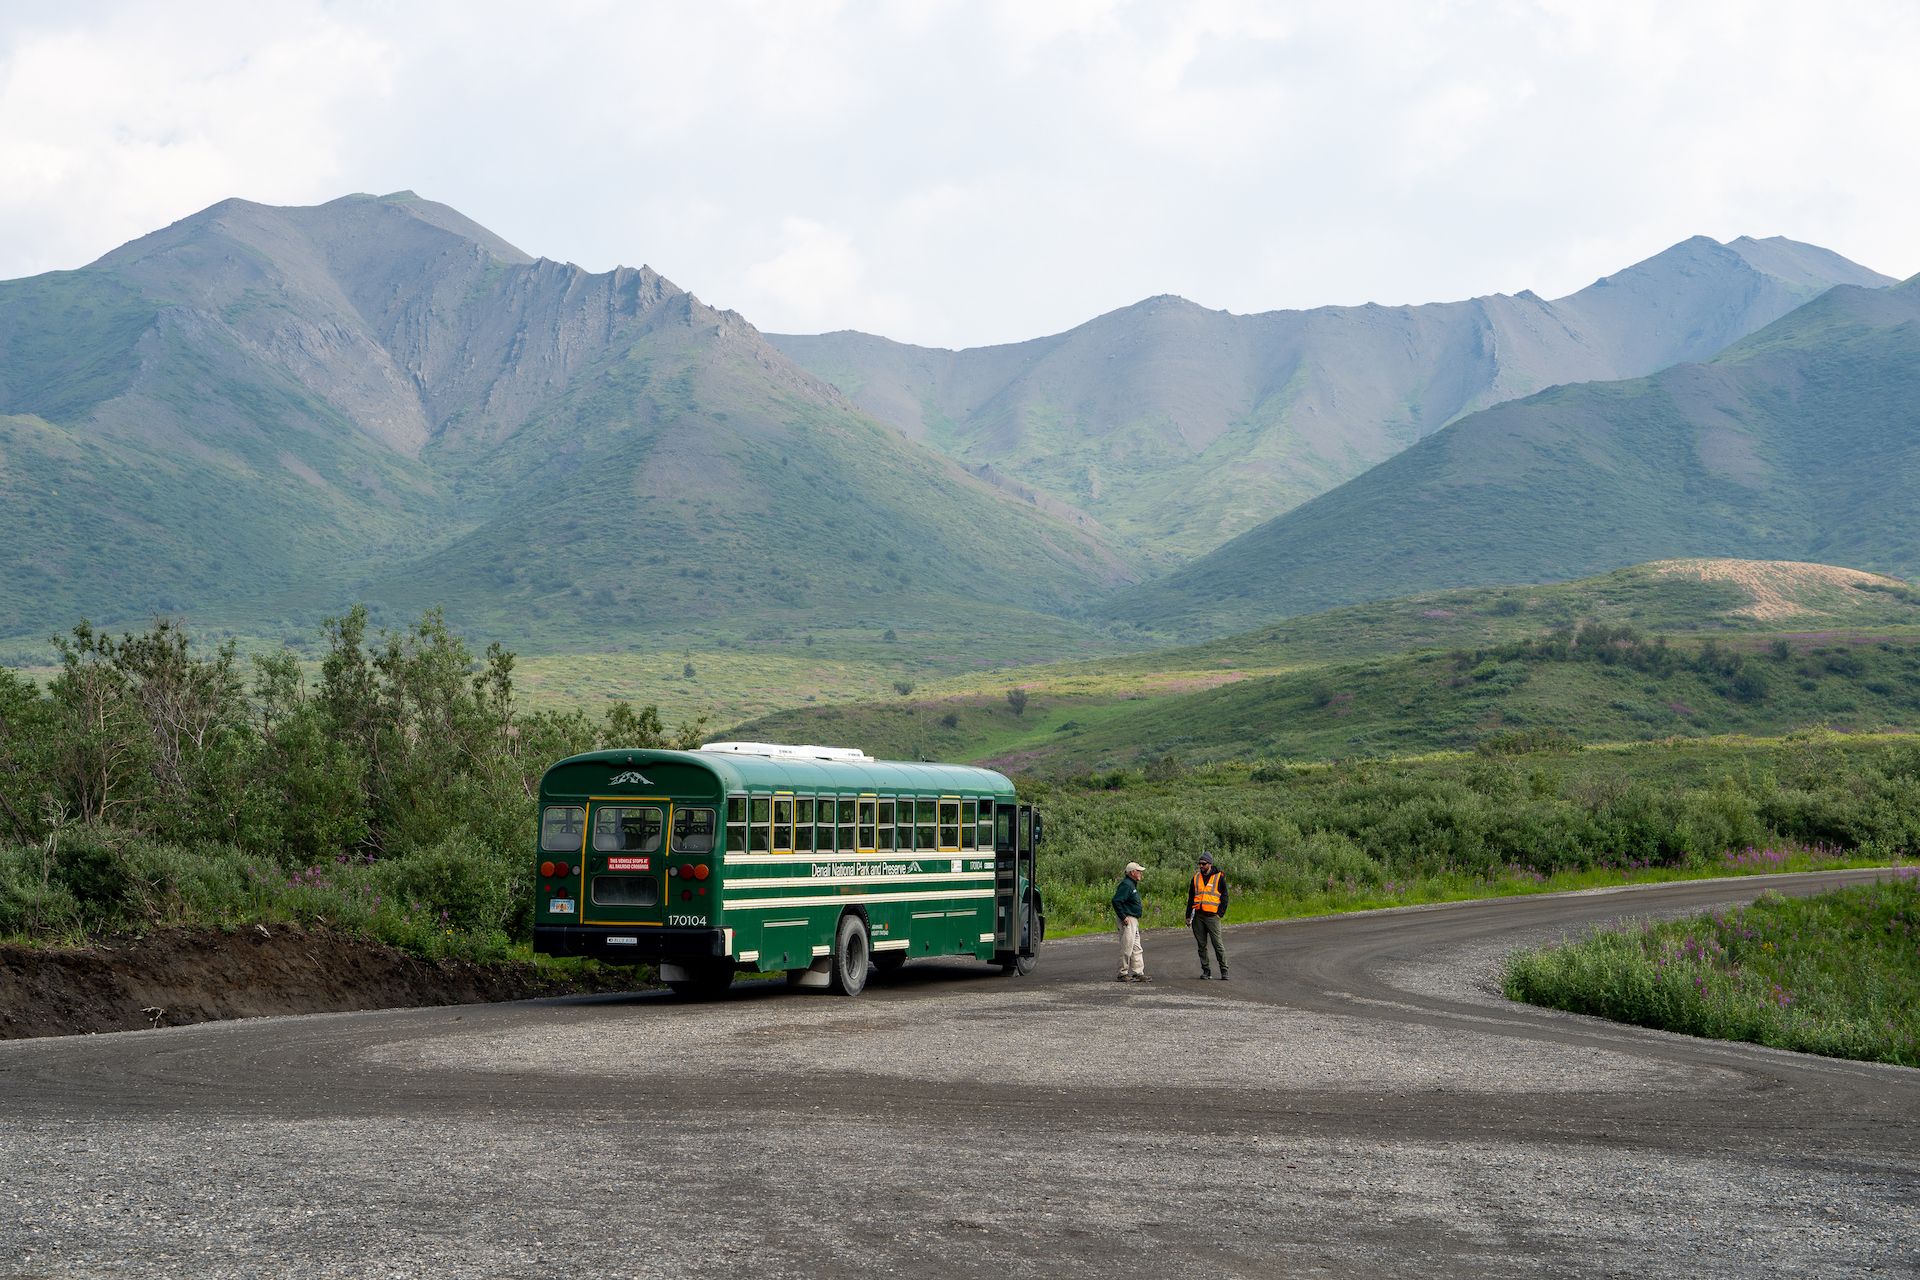 The green bus a.k.a the hiker bus